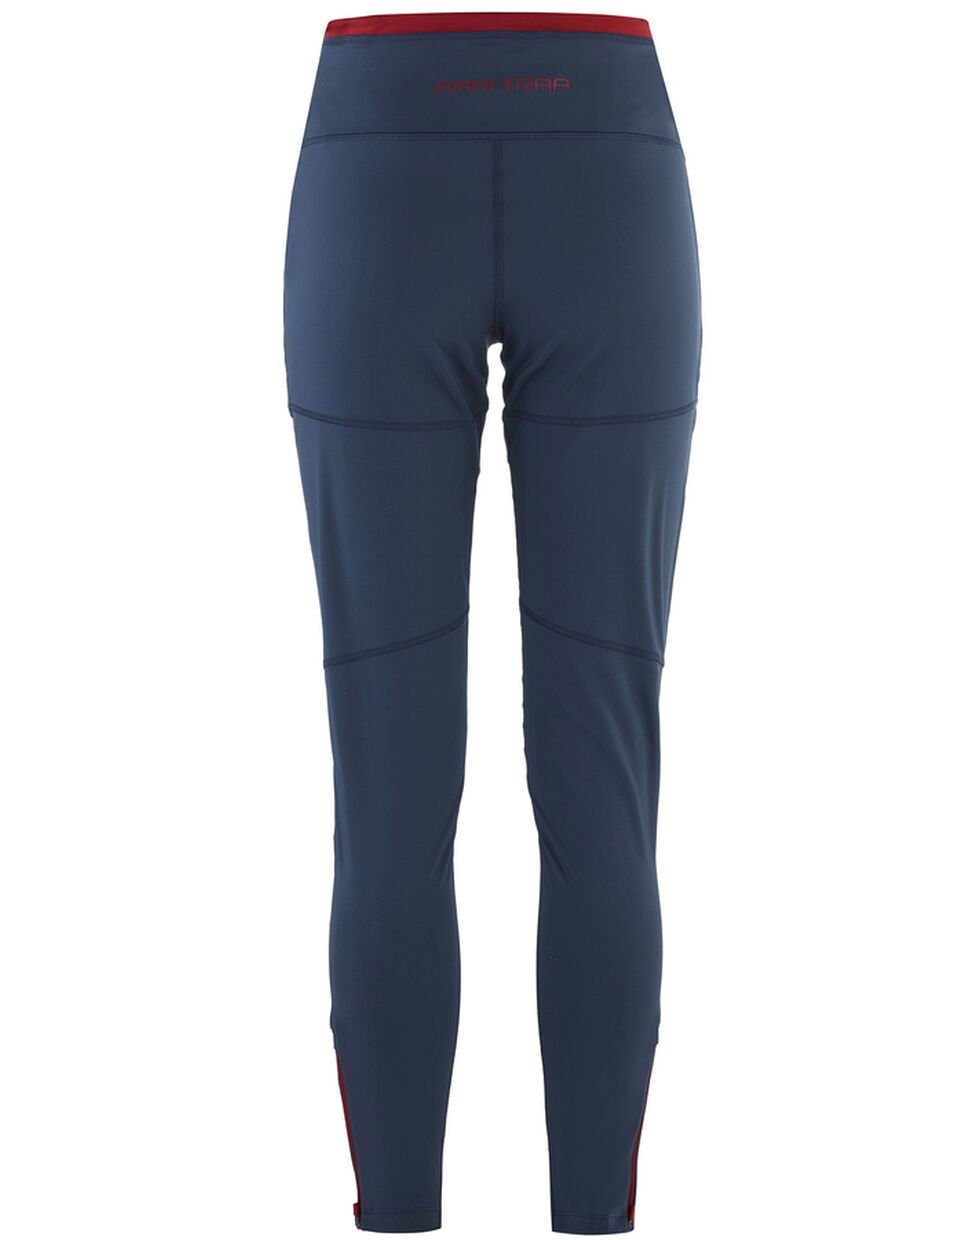 Kari Traa W's Sanne Hiking Tights - Recycled Polyester & Recycled Polyamide Marin Pants